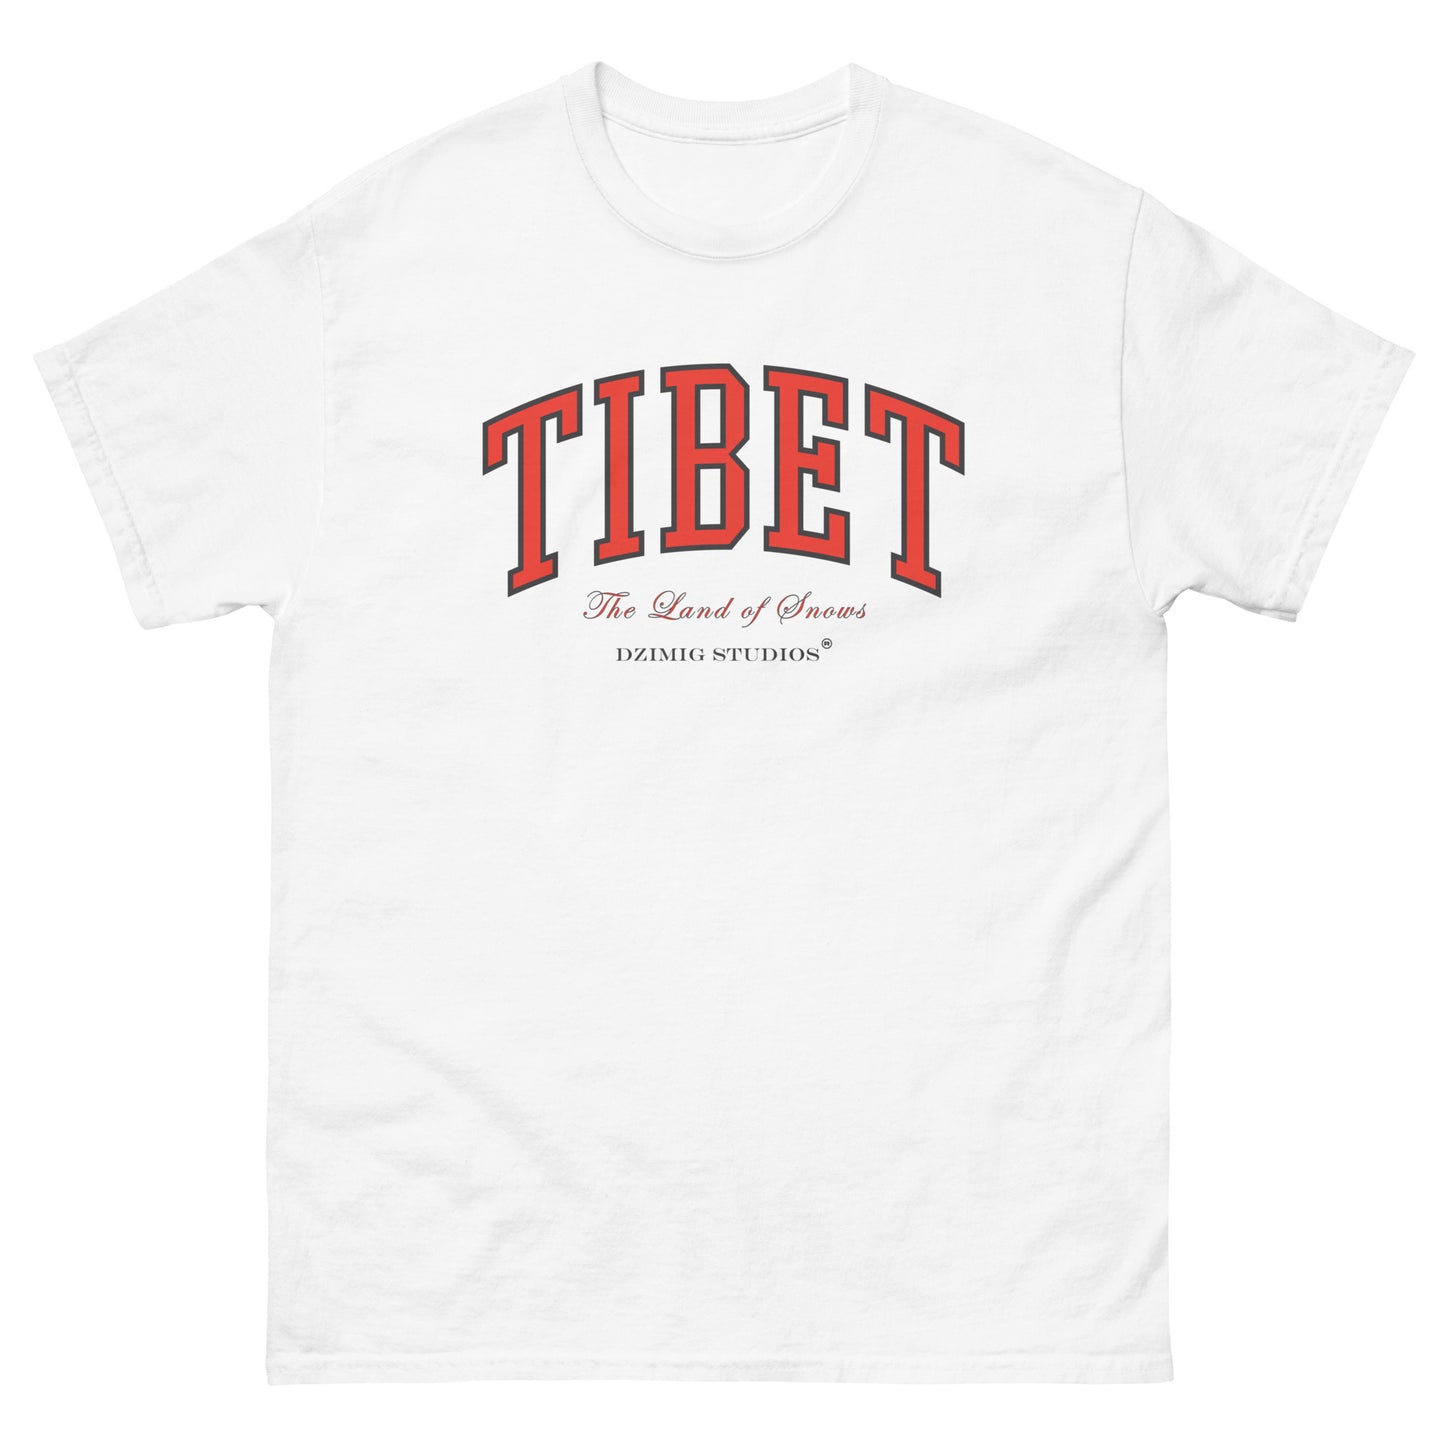 Unisex classic tees. TIBET CLASSIC TEES are curated and designed under Dzimig Studios' Tibet Archive Project.  The tees are avilable in four different color. The tees go perfectly with daily casual wear.